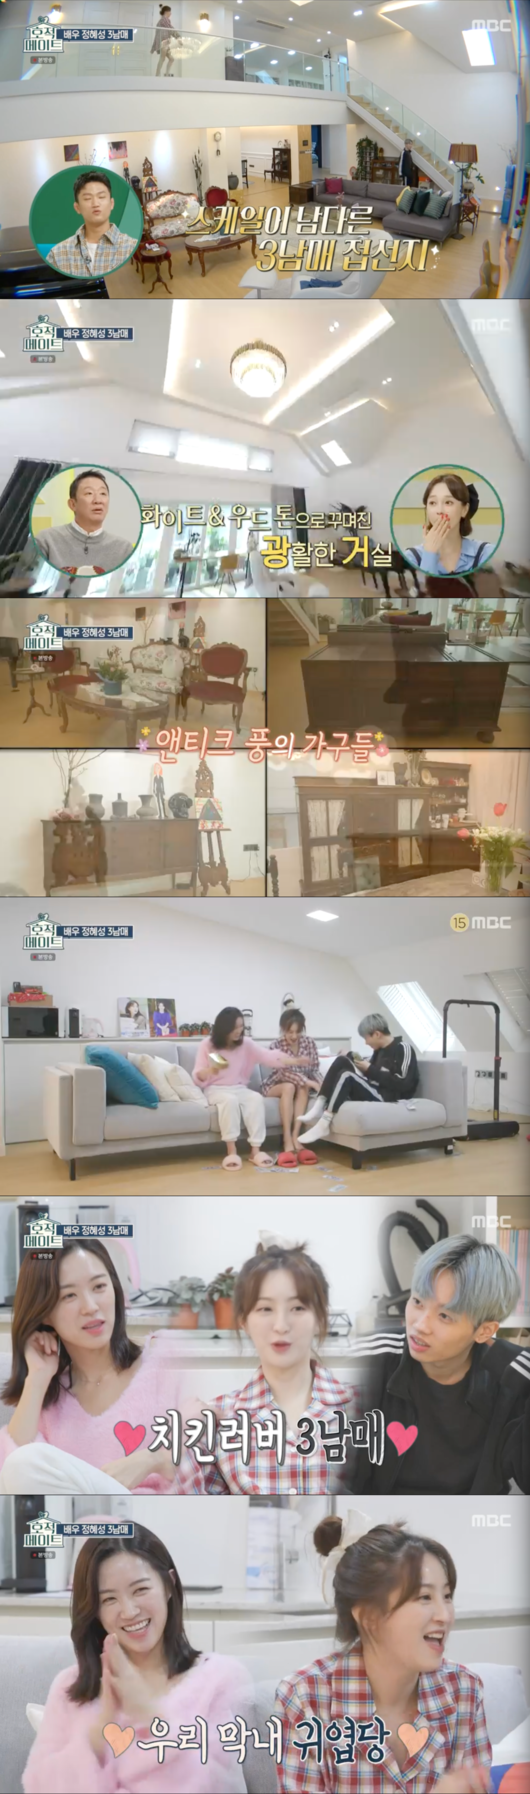 Actor Jung Hye-sung first unveiled a mansion where three brothers and sisters live together.Jung Hye-sung first appeared on MBC family mate on the 8th and said, It is the second of two boys and two girls.Im not close to any of them, and for the first time, I have a single room for three brothers and sisters, he said.His family mate was a big Sister Jung Hyun Jung and a 12-year-old About Her Brother Jung Jae Heon, three years older.Jung Hye-sungs routine was different in scale: he healed from morning by installing a wet sauna in his room bathroom and called Sister and his brother who lived in the same house by phone.The grand piano was placed in the spacious living room, and the antique interior and modern kitchen attracted attention.Jung Hye-sung, a three-sister, gathered in a two-story living room as wide as a soccer field.Jung Hye-sung and his Sister handed Gift for the youngest, who graduated from Stoneman Douglas High School shooting.The big Sister made 100,000 won in cash and Jung Hye-sung made the Credit card Gift to make his brother happy.Sister, Jung Hye-sung, who said he was not close to his brother, but his daily life was harmonious.Jung Hye-sung talked with his family and wrote the Busan dialect comfortably and chatted in front of his blunt brother.About Her Brother of Jung Hye-sung said, What if I should marry?I asked, Do you have to marry? He laughed back.Three brothers and sisters said they like Chicken so much that they are misunderstood as a poultry house.However, Jung Hye-sung and Chicken, who do not like fried flour, were divided into the youngest fried par Sister - the youngest.Eventually, the main character, the youngest fried Chicken, came to see the Stoneman Douglas High School shooting graduation album.In particular, Jung Hye-sung has laughed at the question of not knowing the new word these days by pouring out the attitude buzzword.family mate